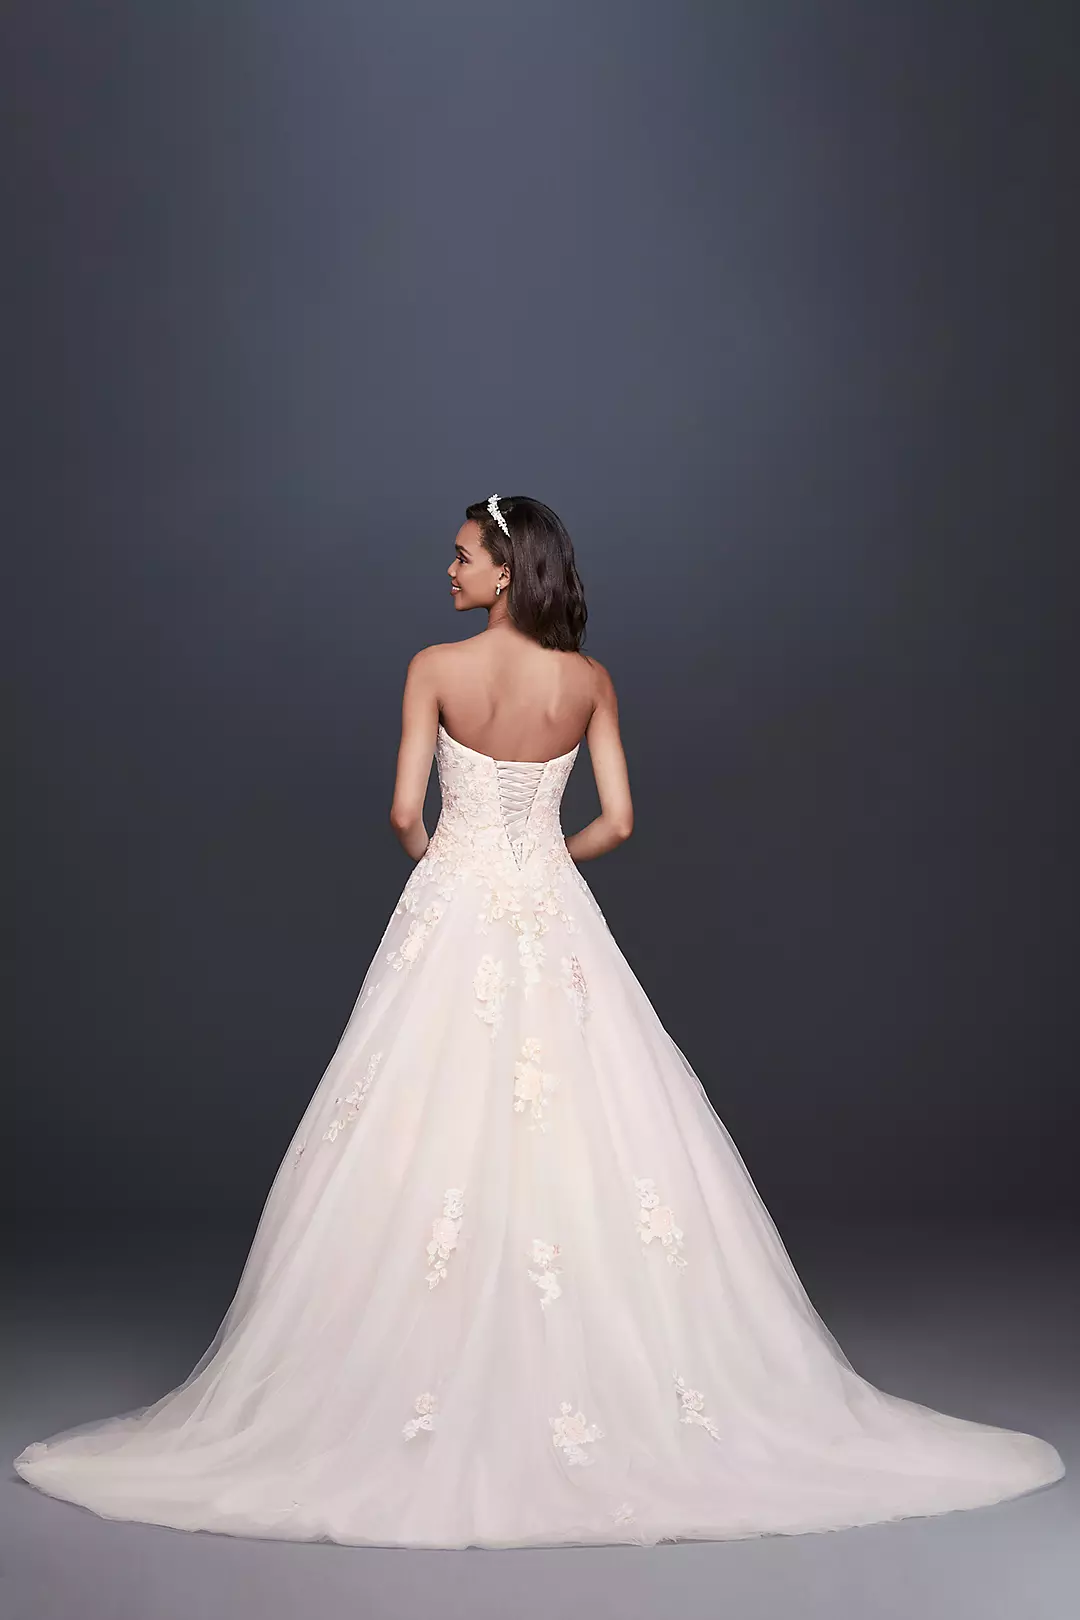 As-Is Embroidered Applique Ball Gown Wedding Dress Image 2